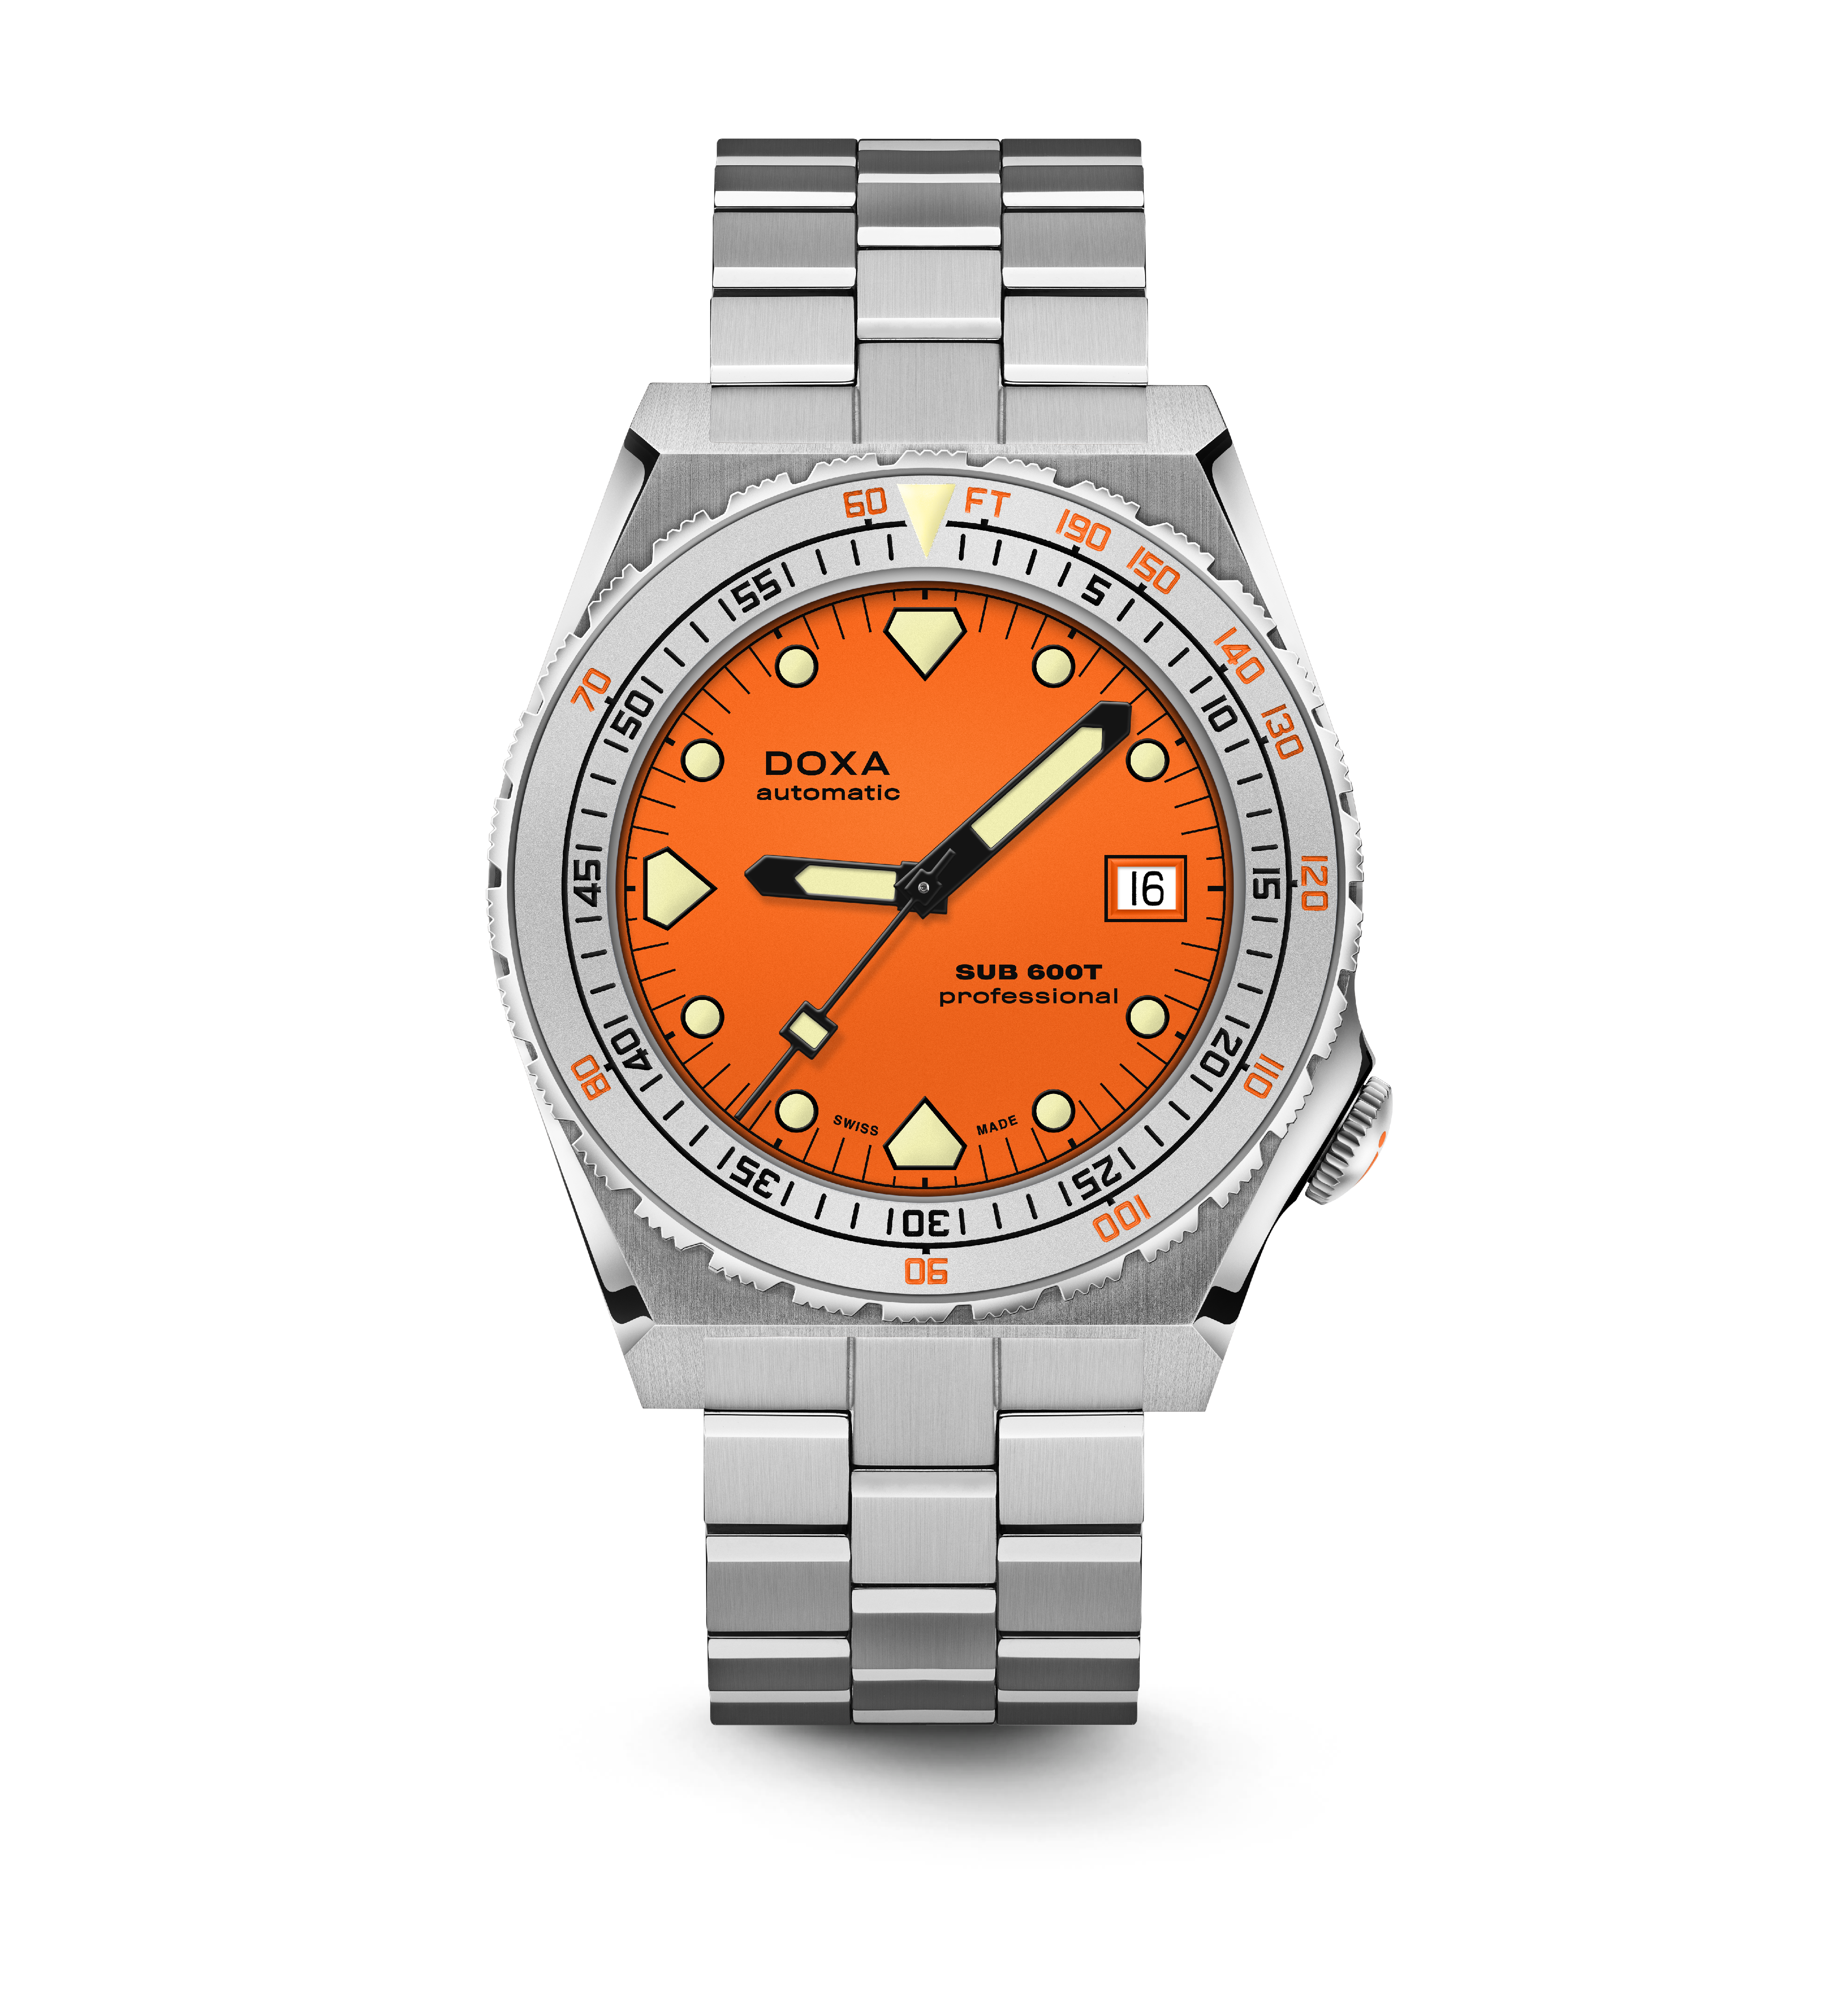 DOXA - Your call to adventure